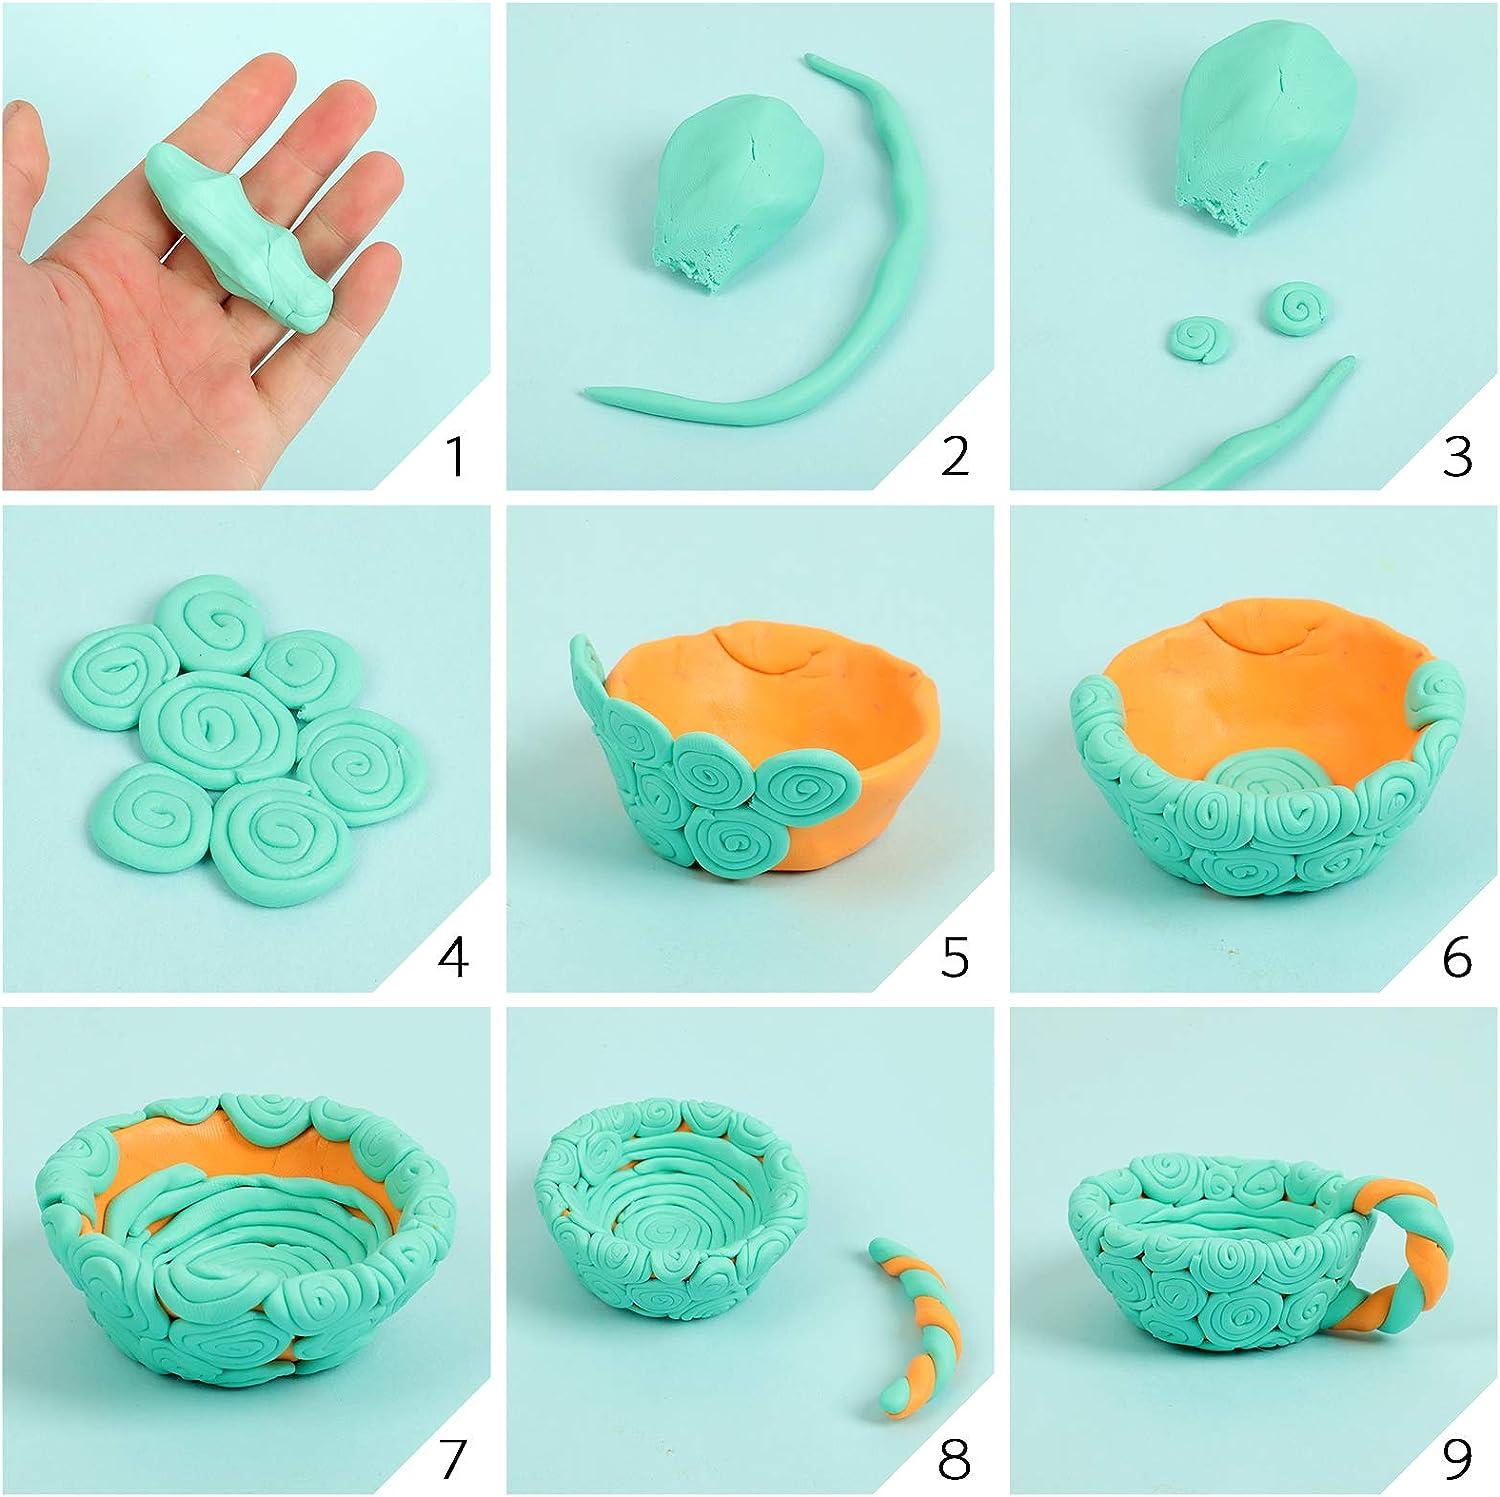 Baking Polymer Clay Perfectly Every Time